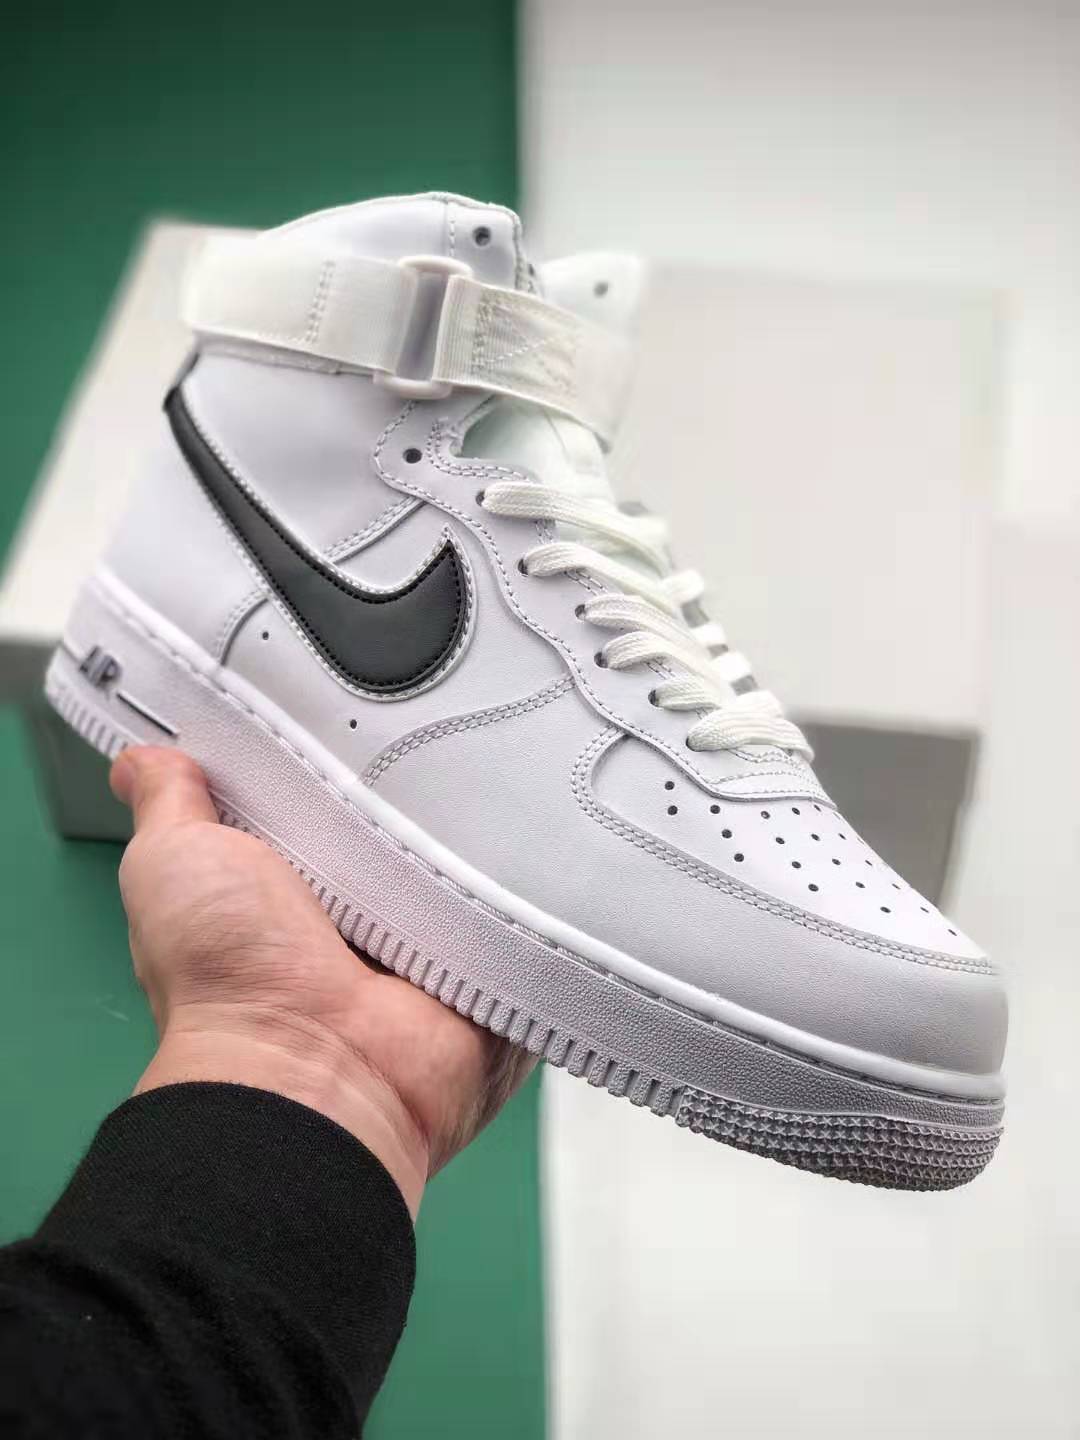 Nike Air Force 1 High 07 3 White Black AT4141-108 - Premium Sneakers for Style and Comfort